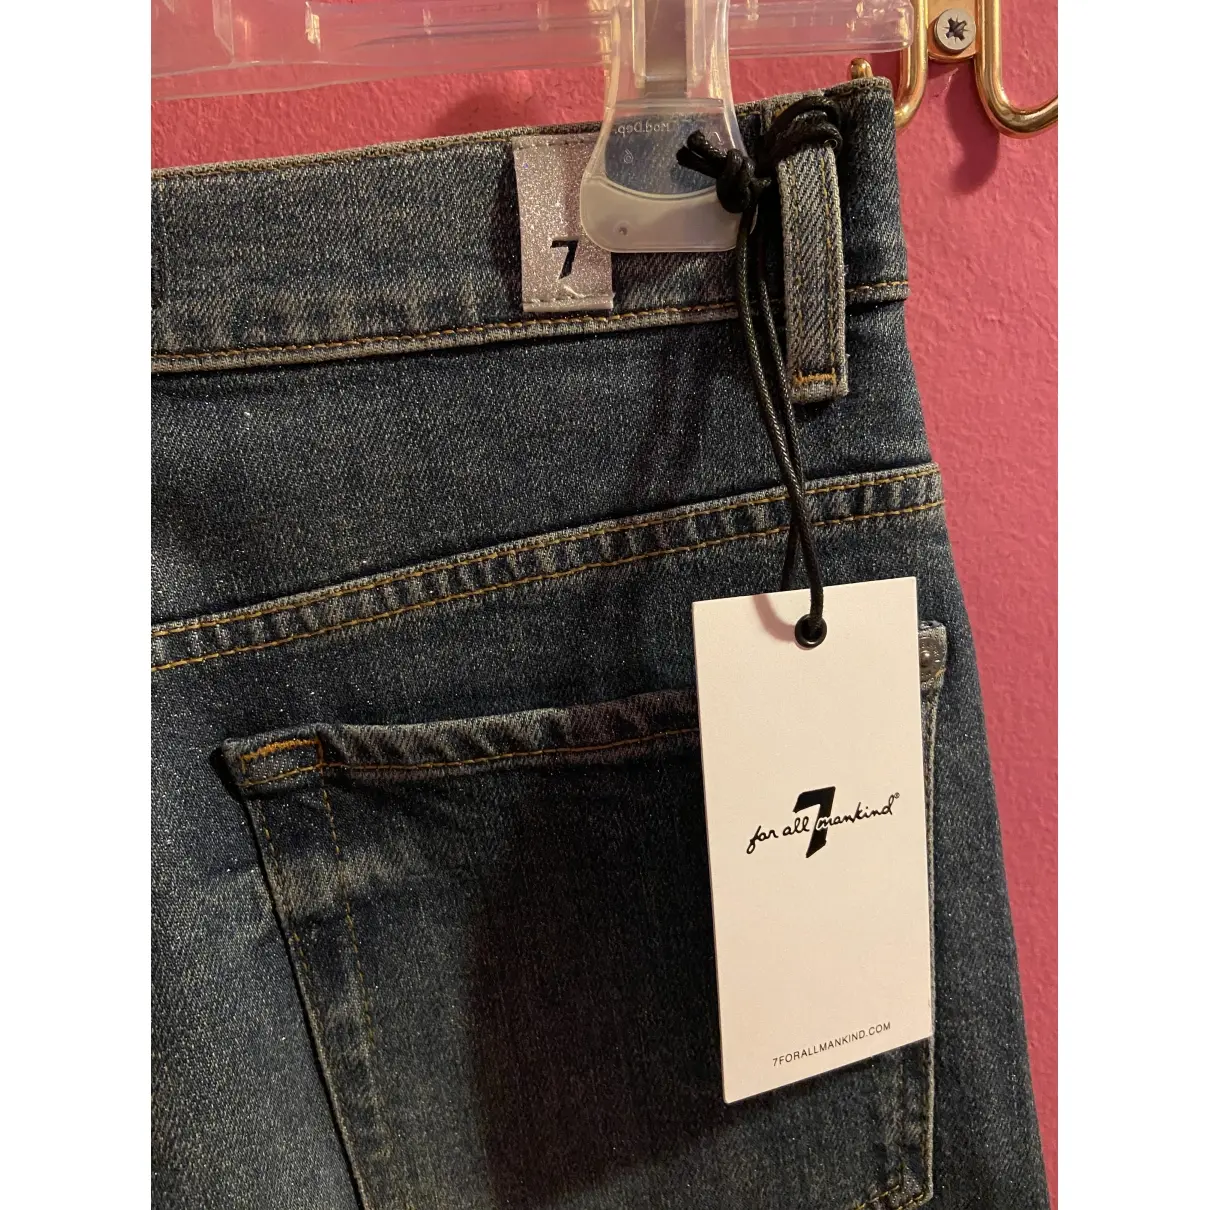 Buy 7 For All Mankind Blue Cotton Jeans online